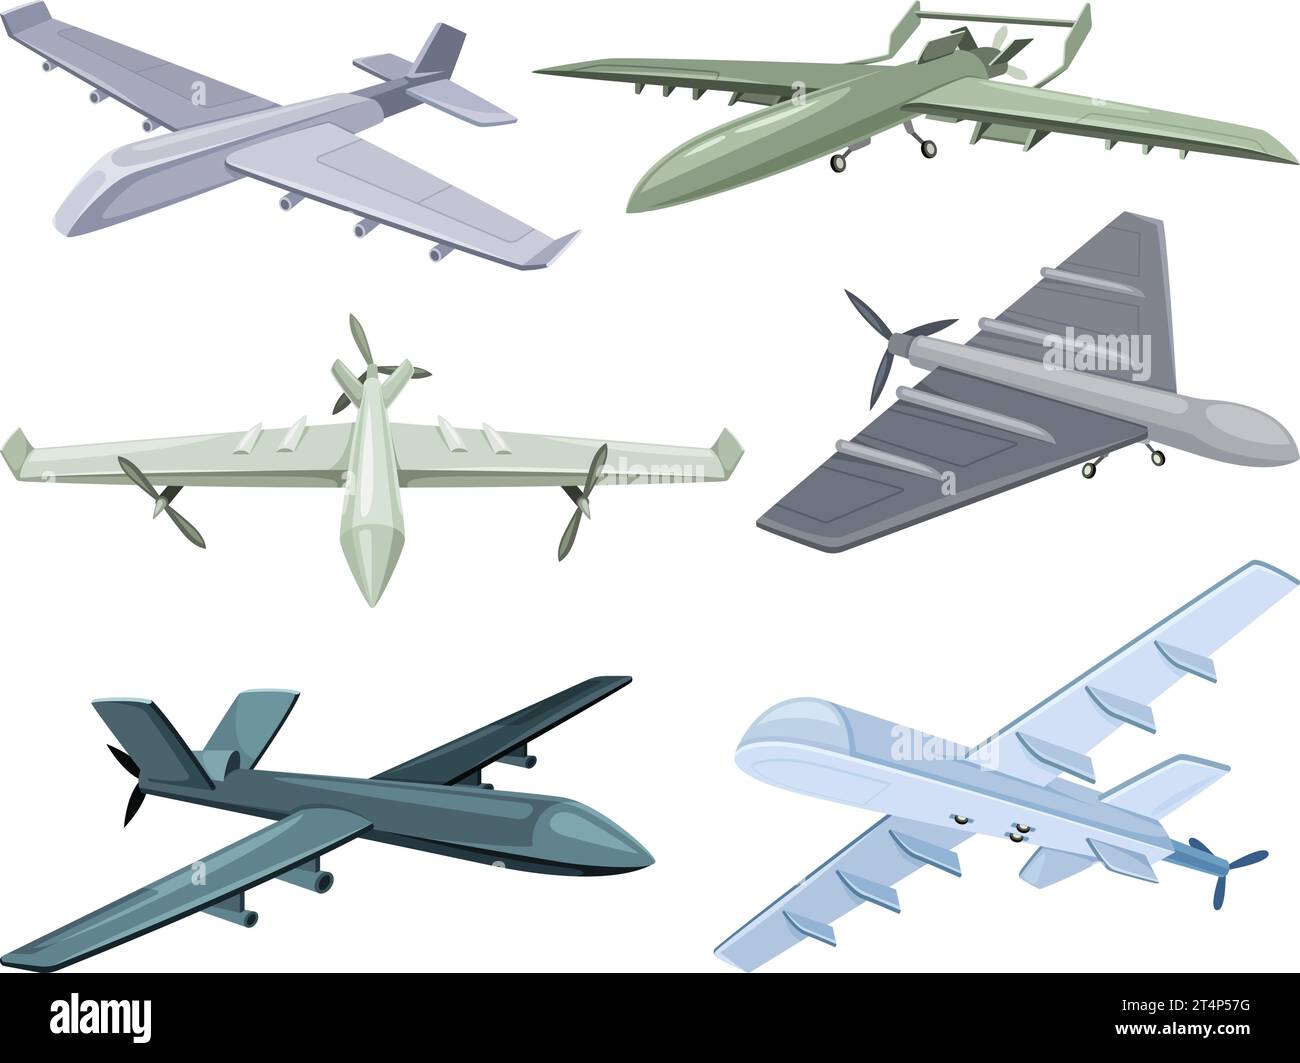 Military uav. War unmanned drones, warfare aerial copter model army plane with camera for surveillance sky attack, mobile technology aircraft control, neoteric vector illustration of unmanned drone Stock Vector